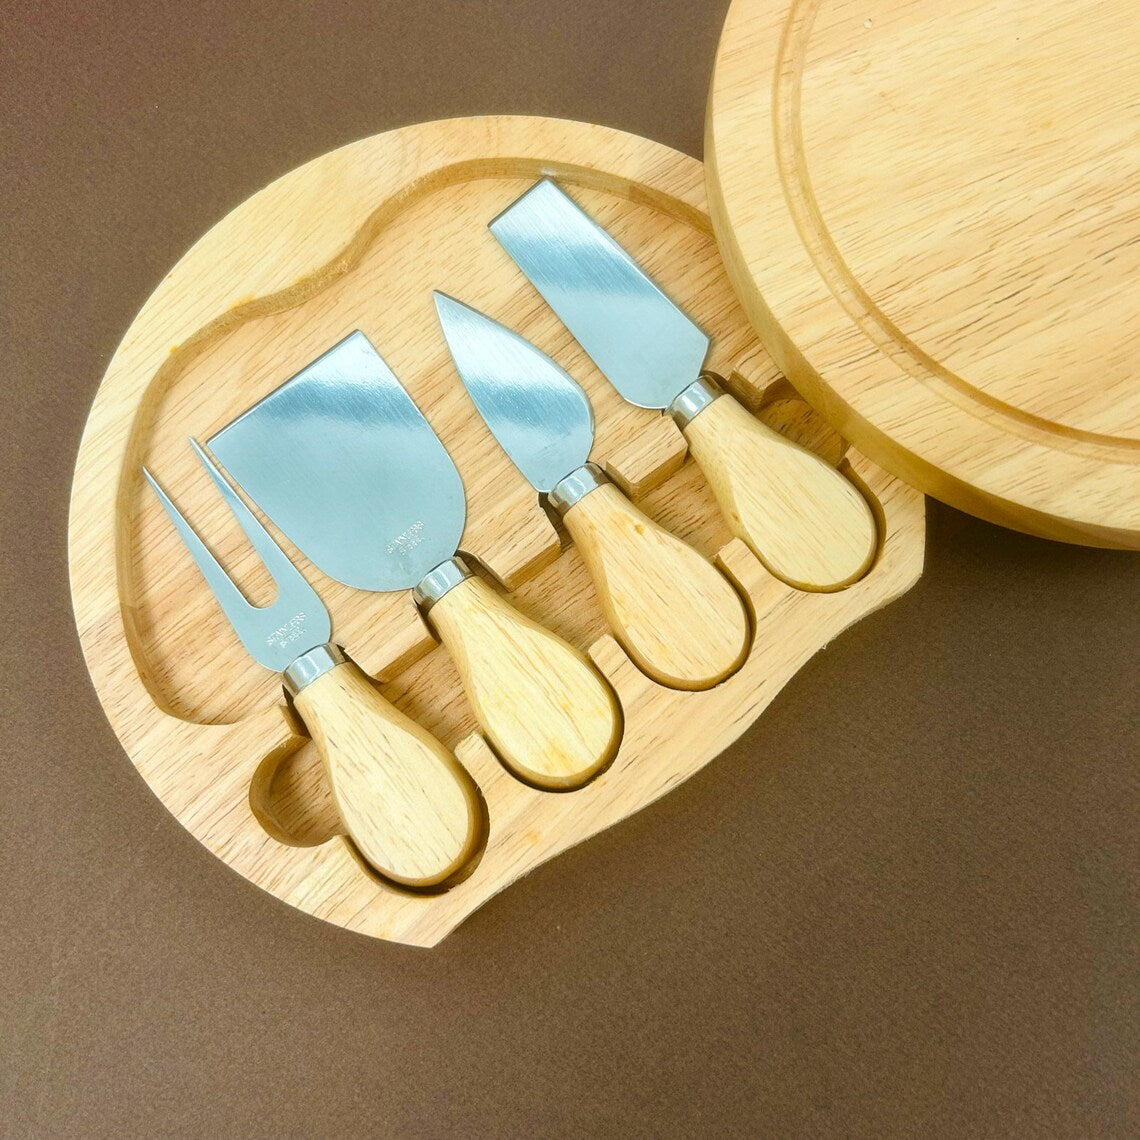 An Attitude of Gratitude Brings Great Things Engraved Personalized Wooden Cheese Board Set